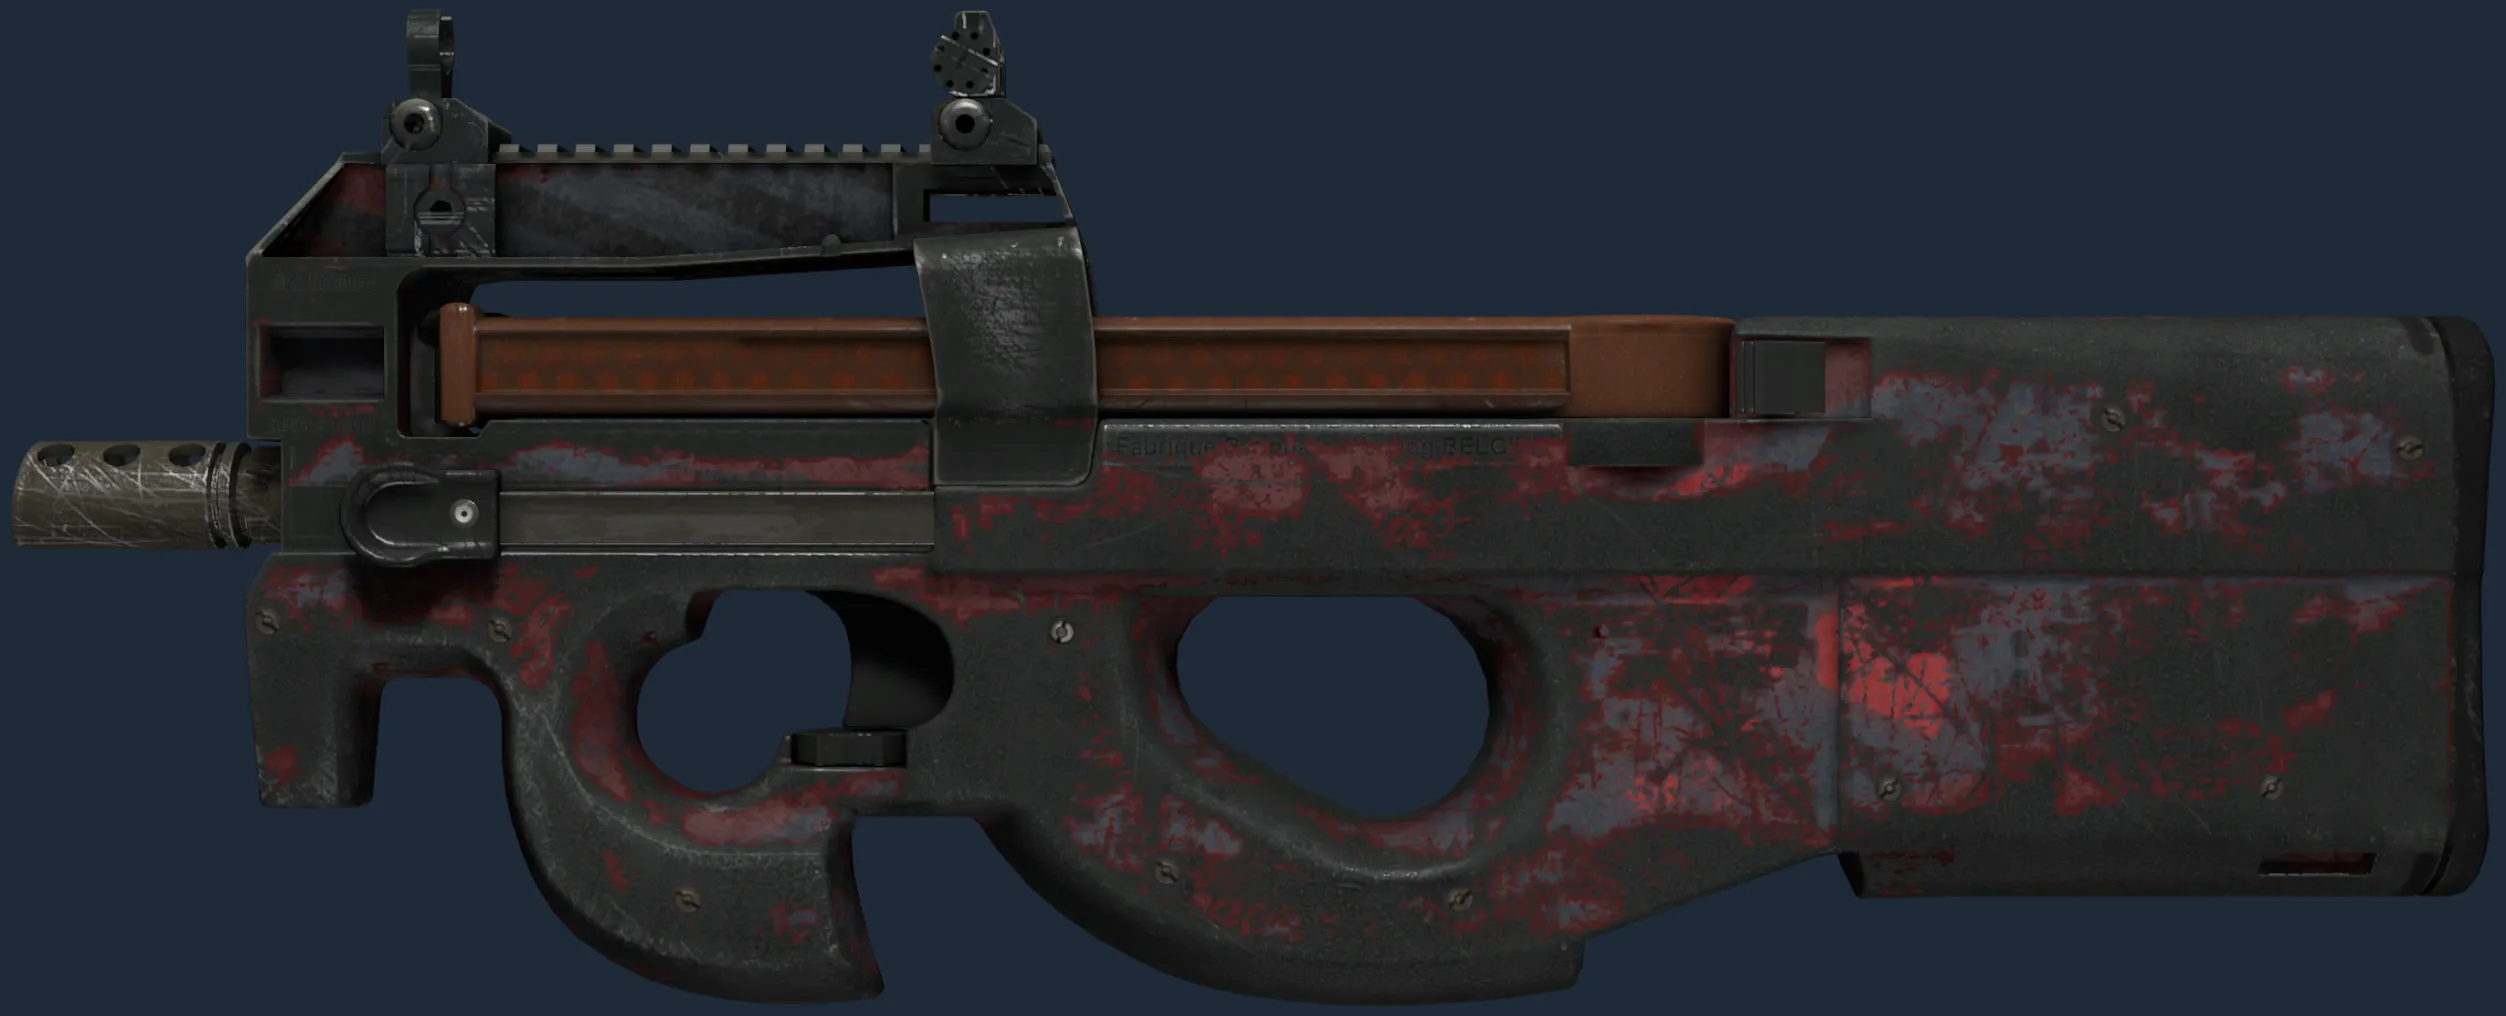 P90 | Fallout Warning (Battle-Scarred)